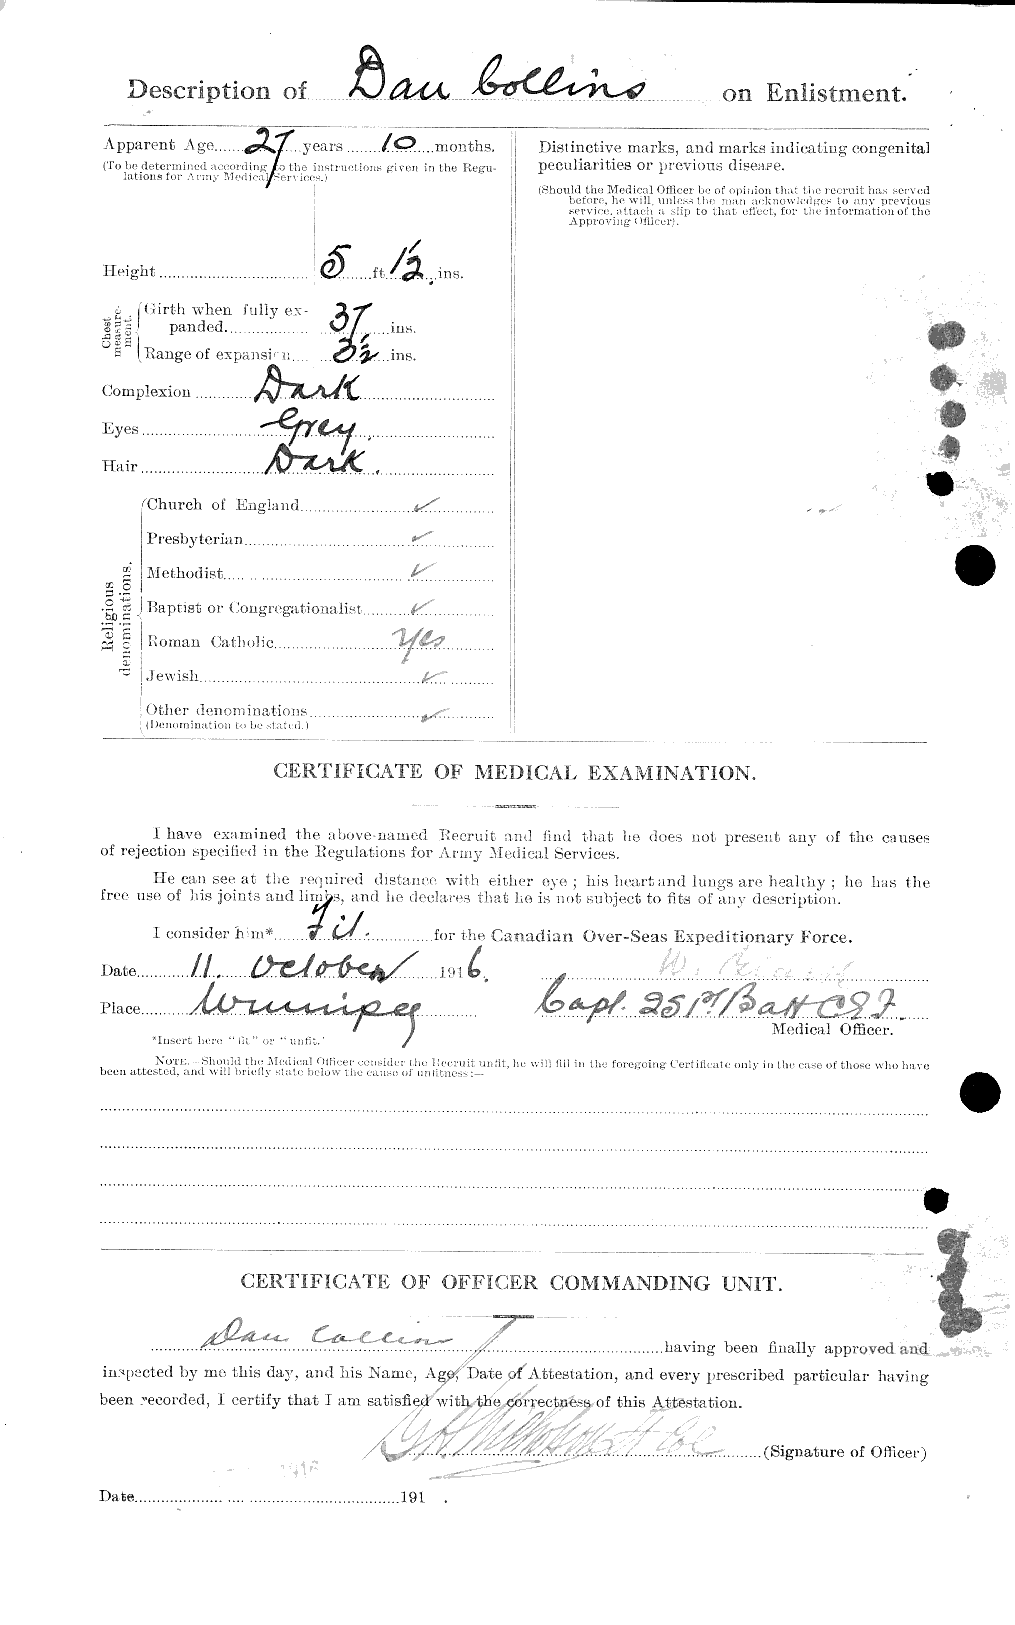 Personnel Records of the First World War - CEF 029067b